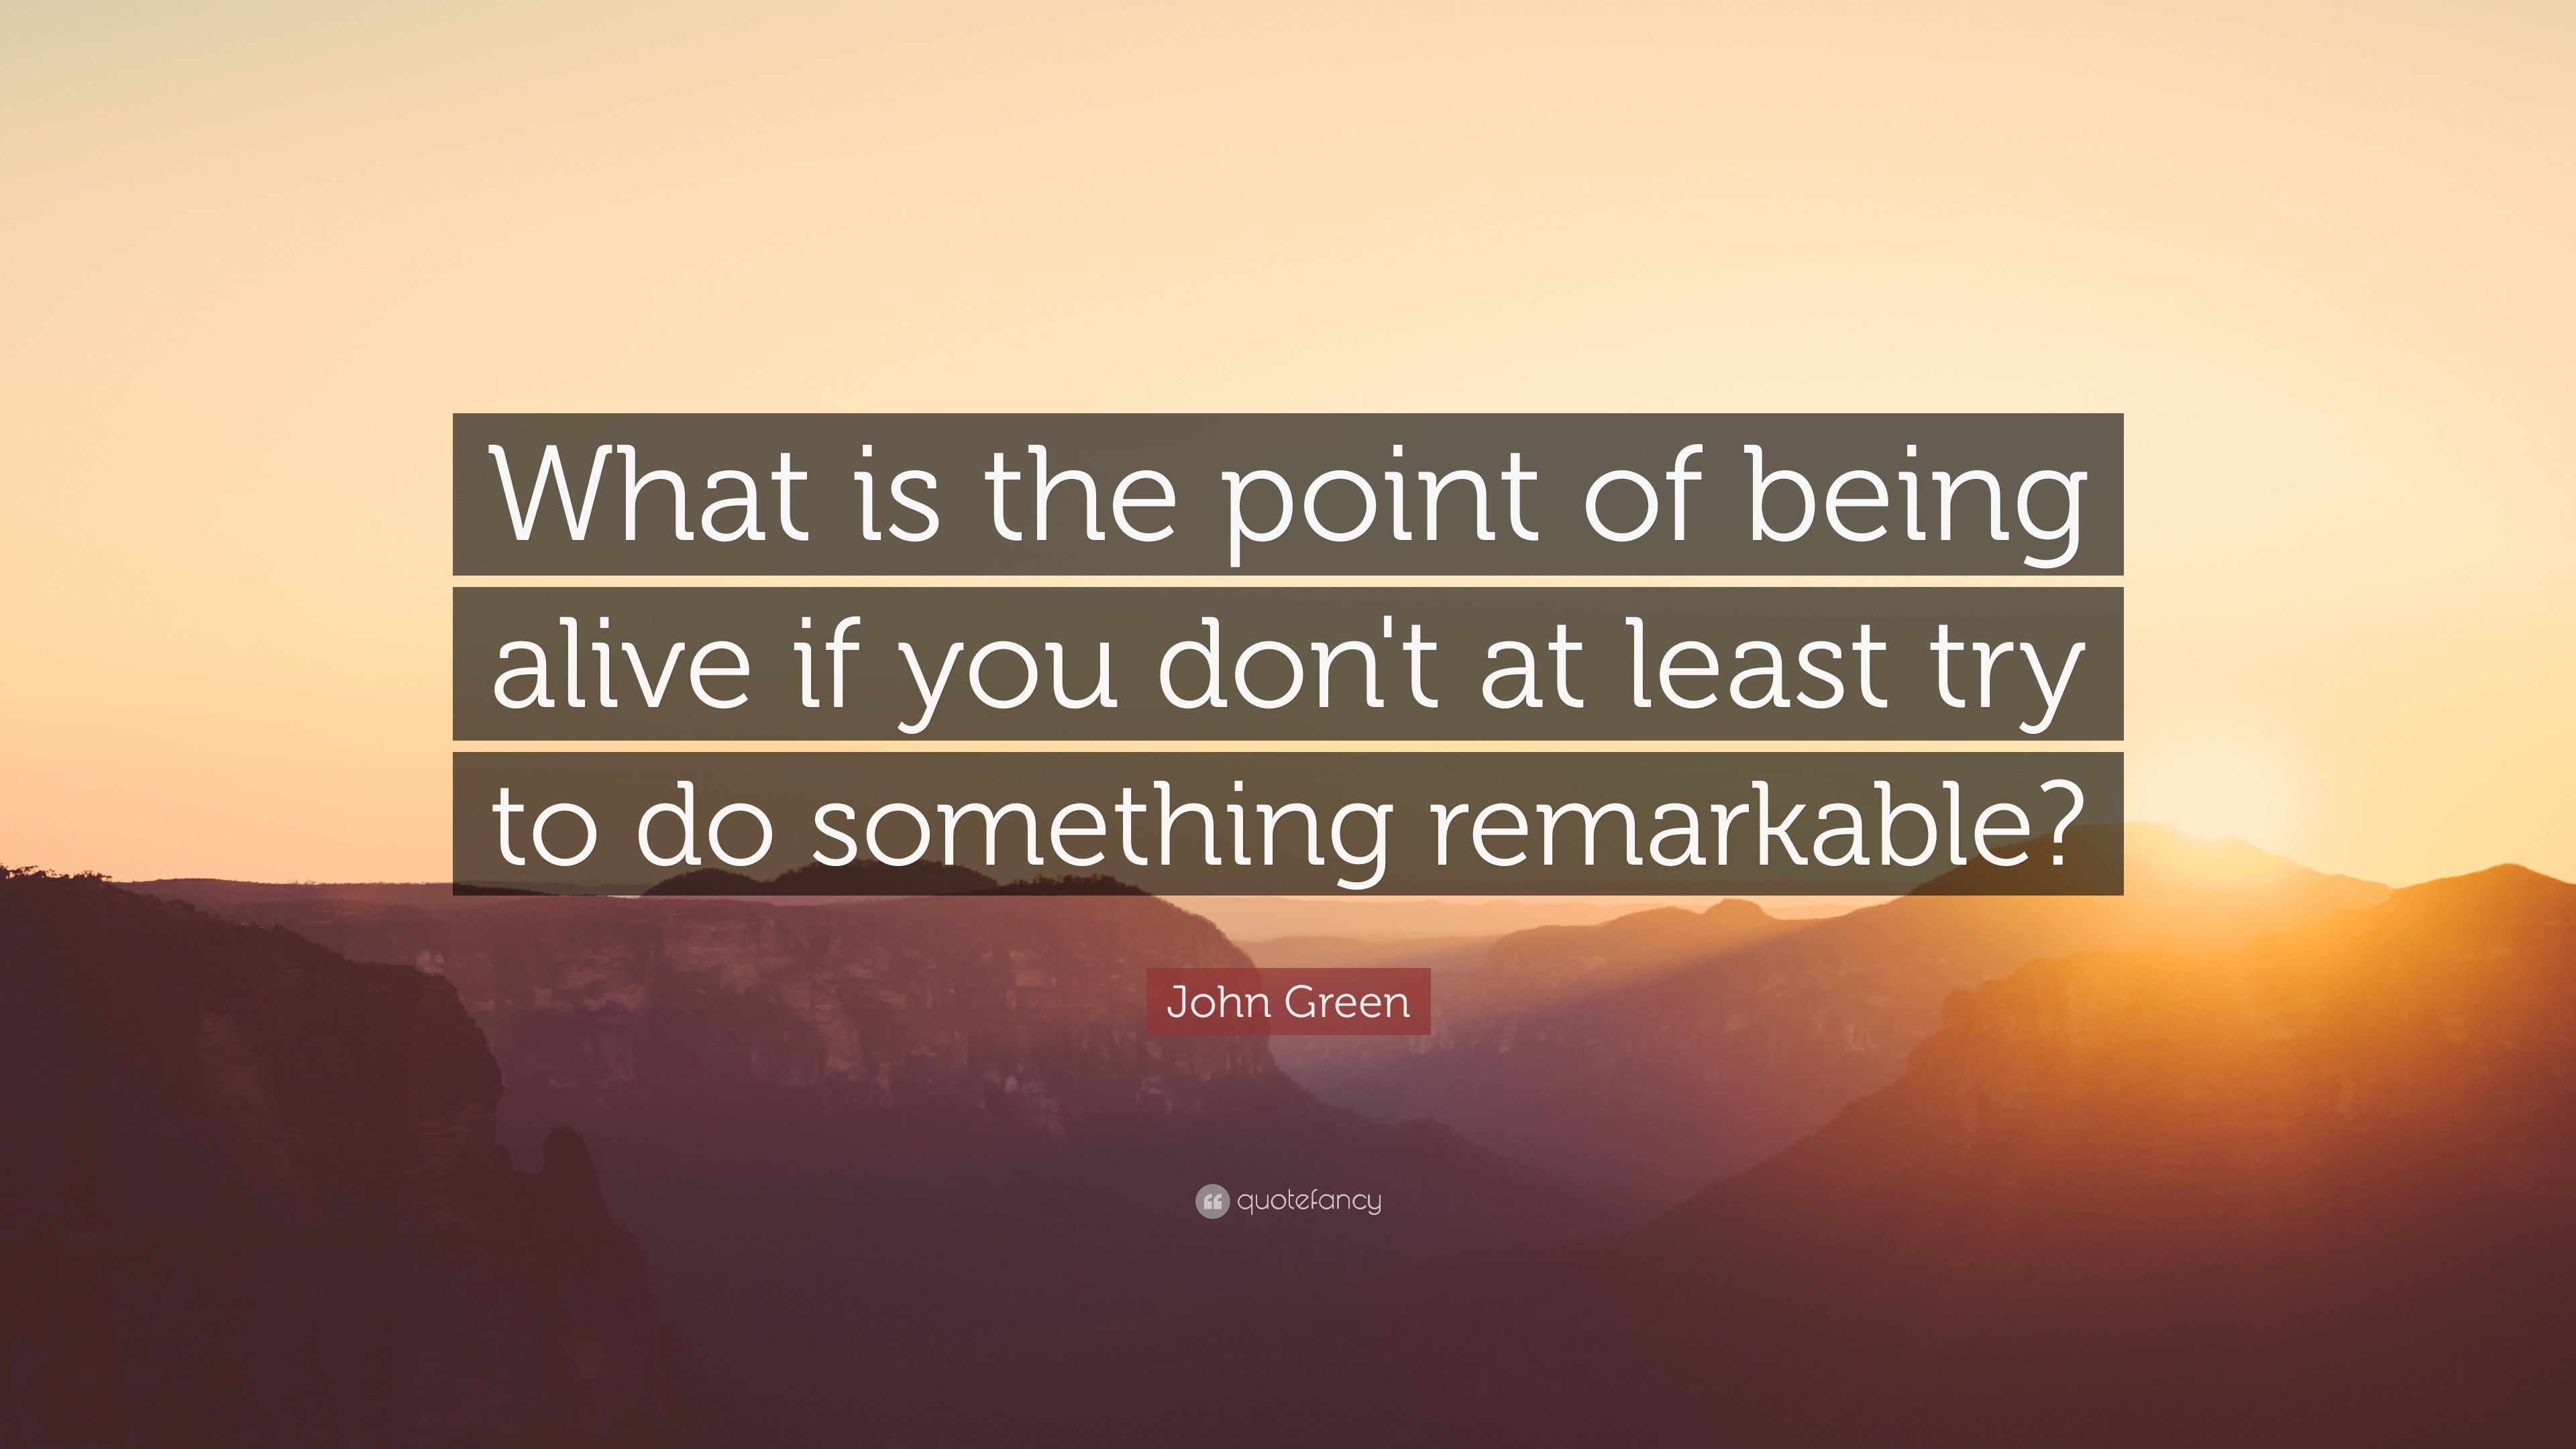 John Green Quote “What is the point of being alive if you don’t at